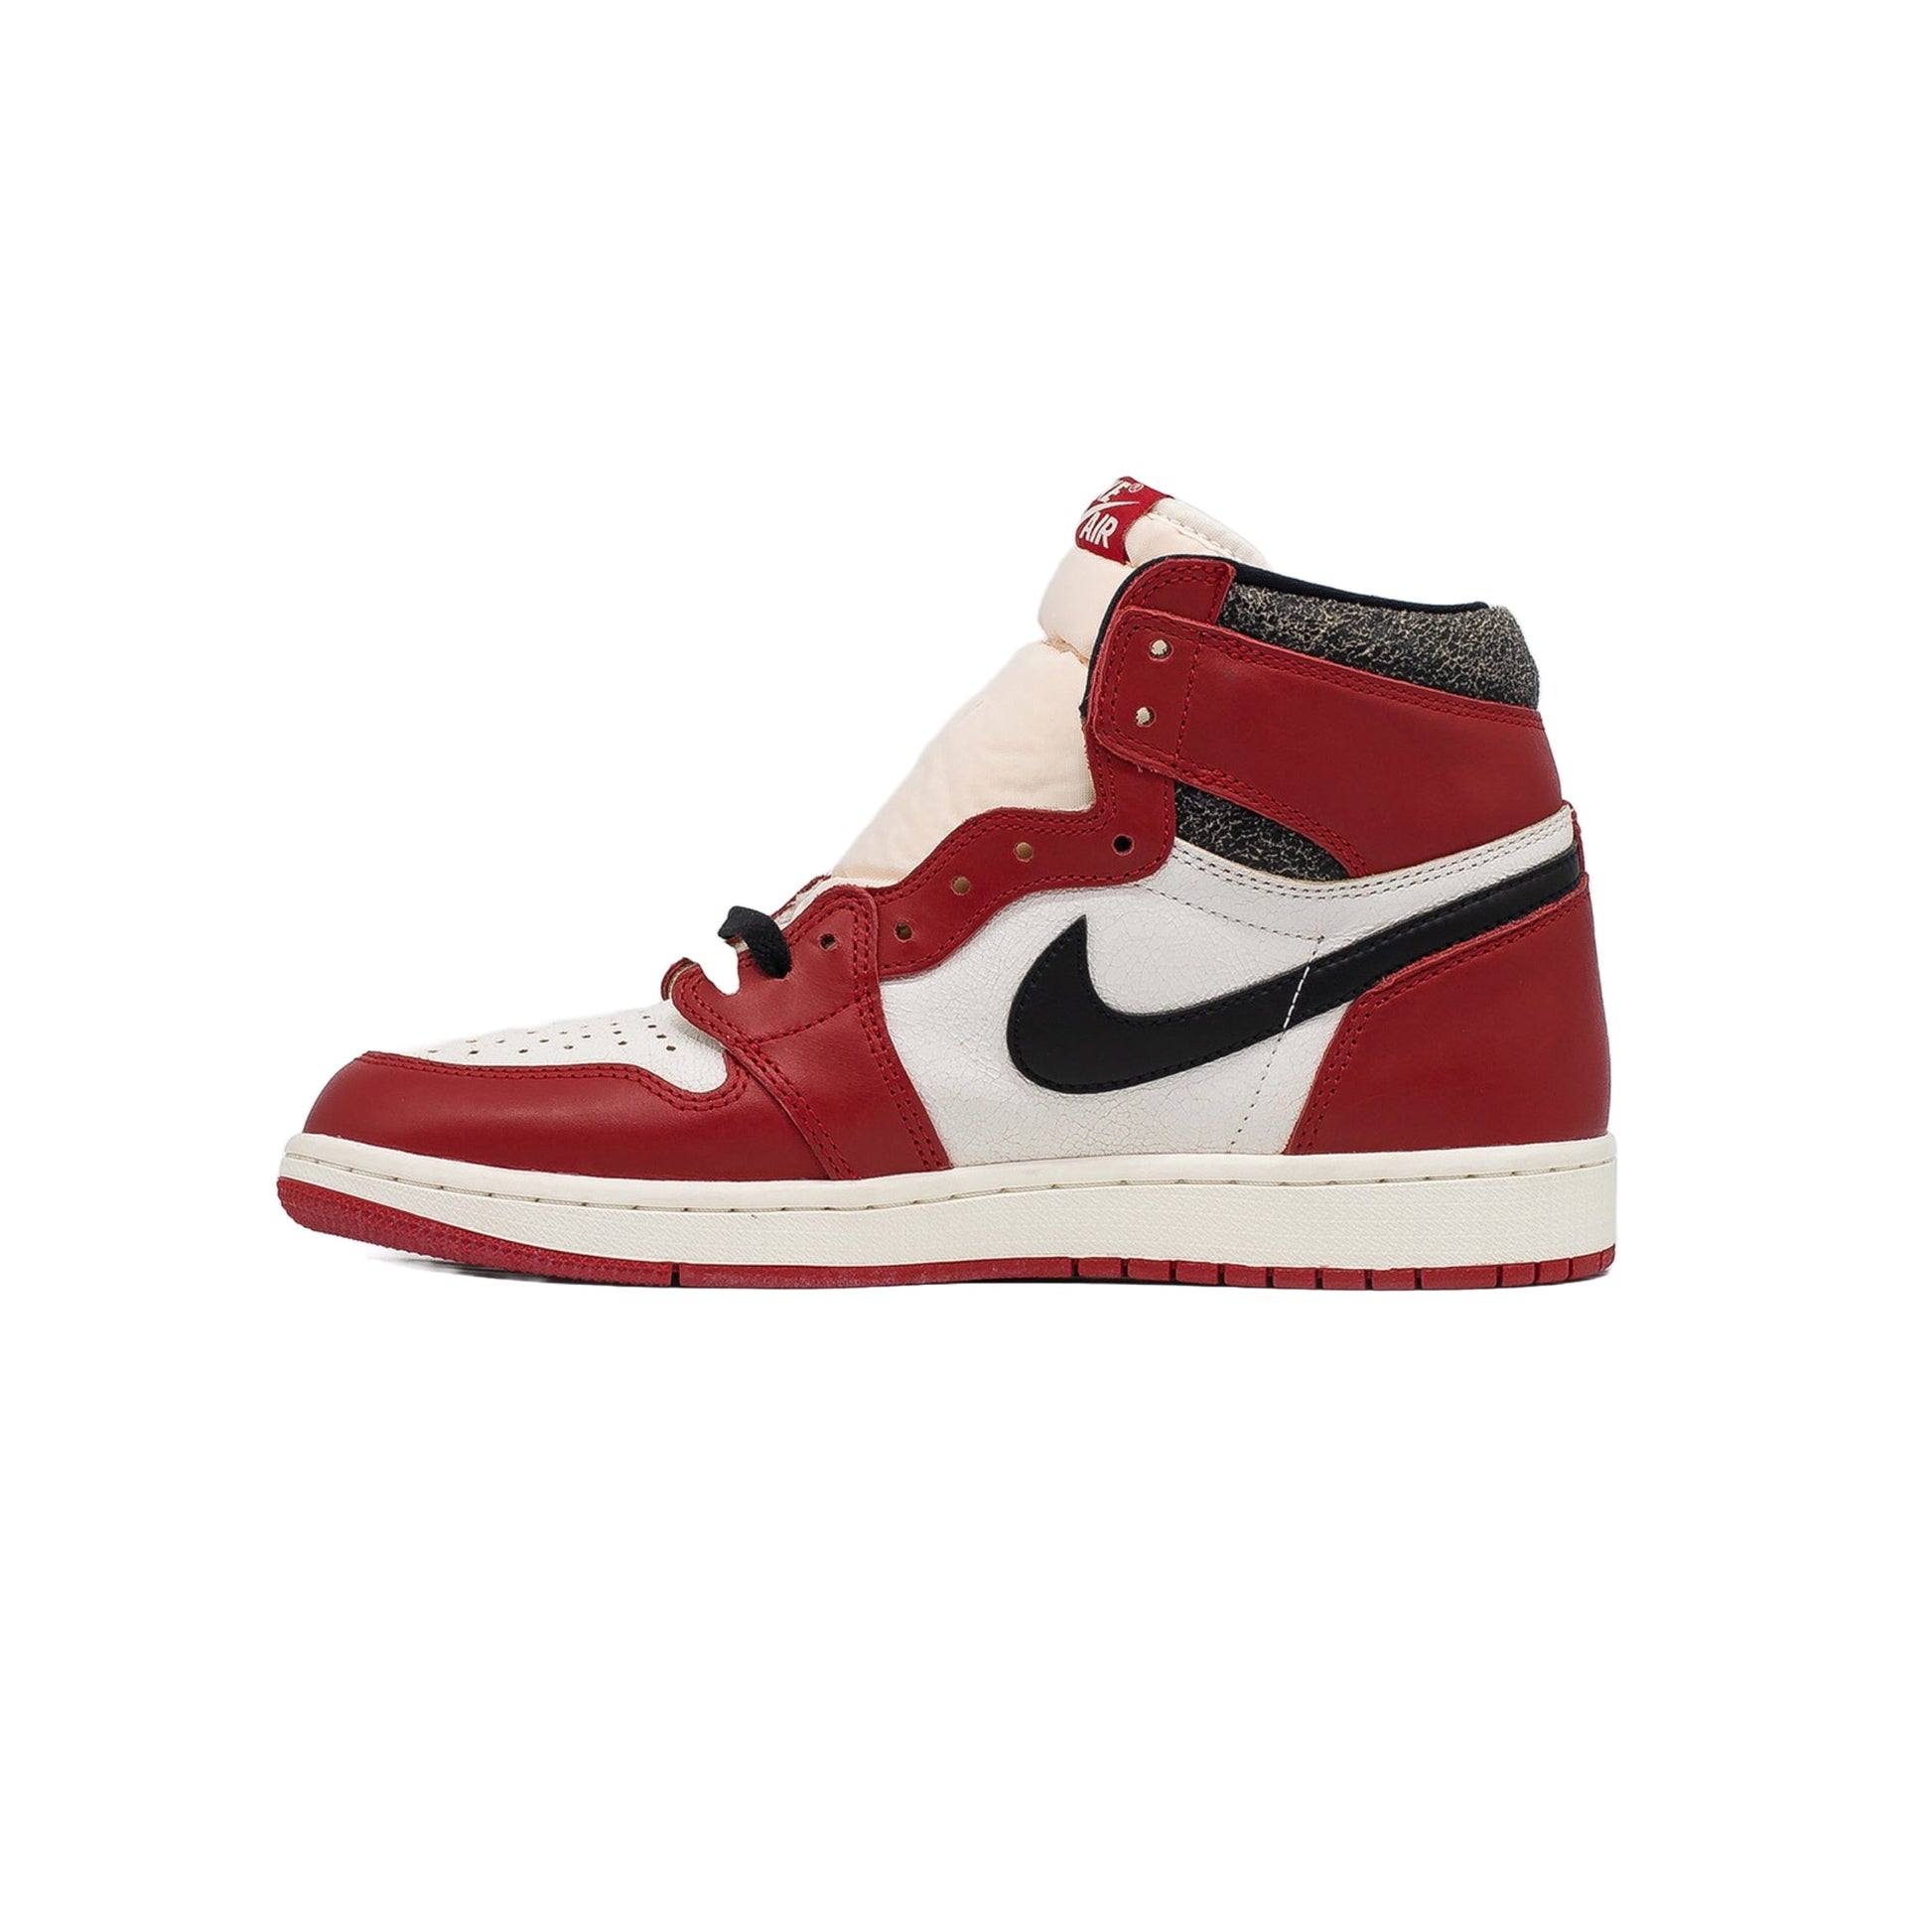 Air air jordan 1 high shadow 2 release info (GS), Chicago Lost And Found